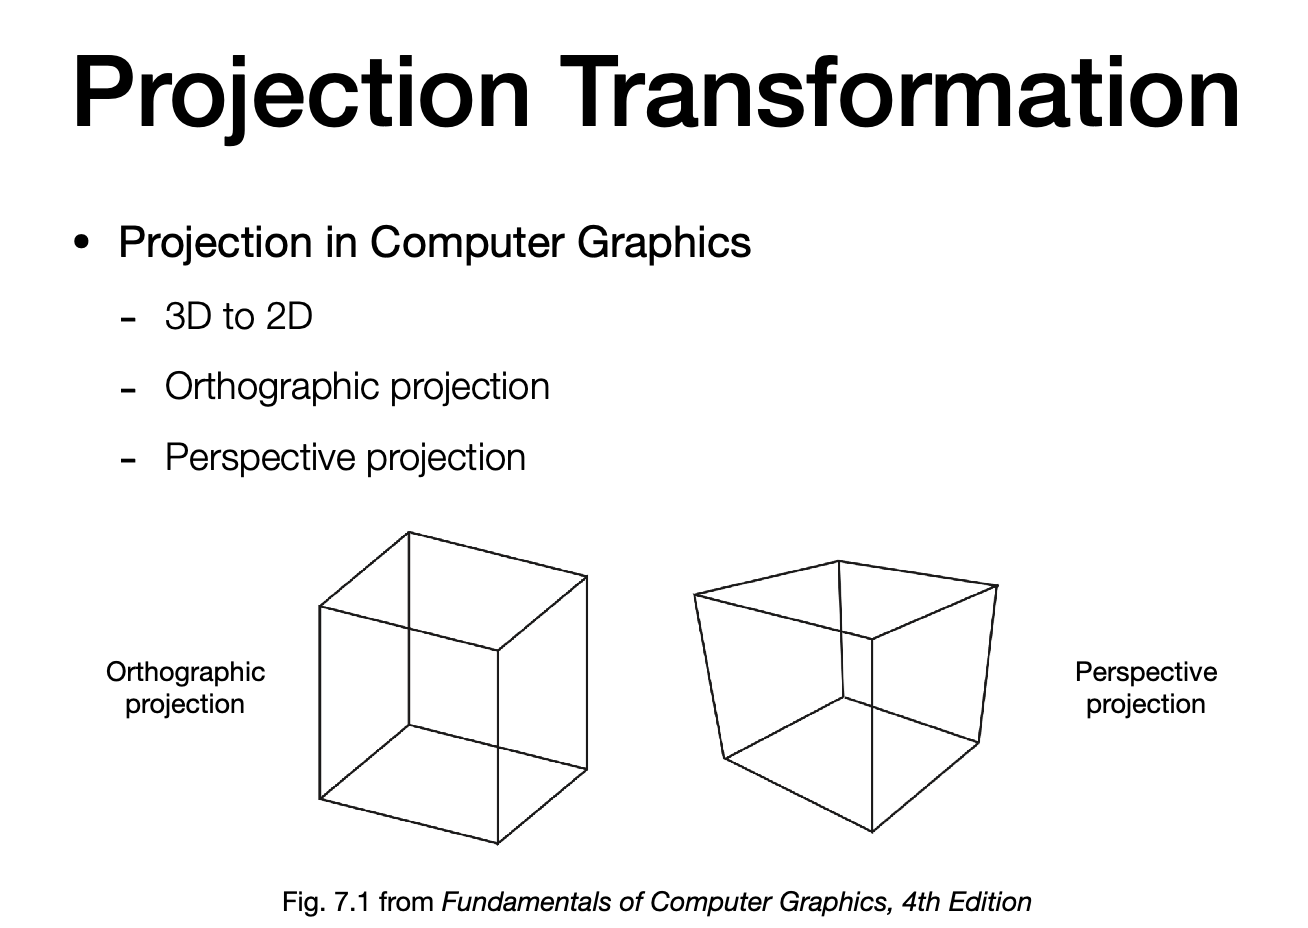 Projection transformation